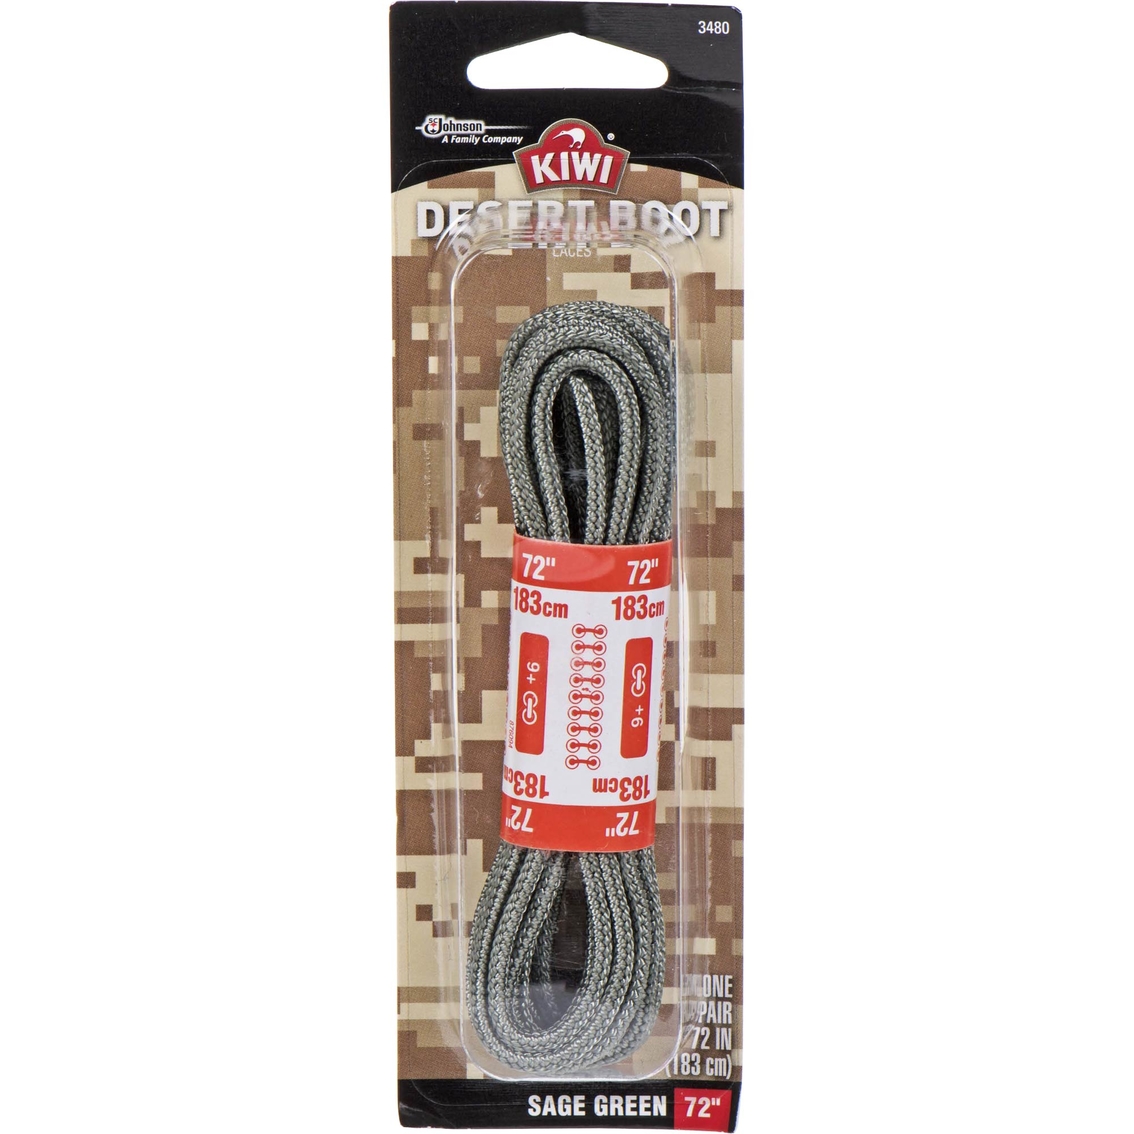 9 inch boot laces